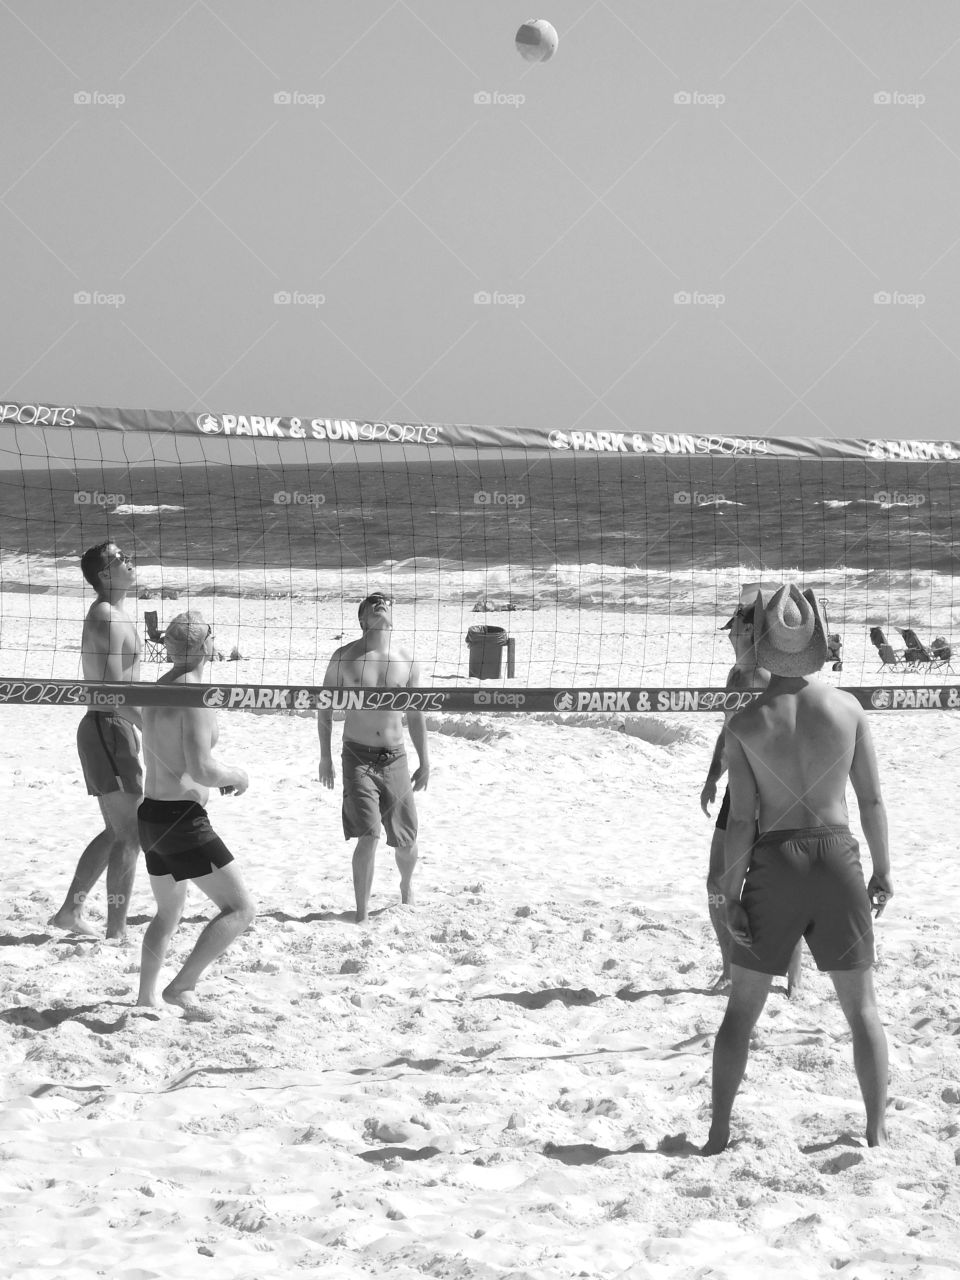 Spring breakers invade the Northwest Florida Beaches - in a good way! Spring breakers enjoy the sunny weather as they have fun playing in the sugary white sands in front of the Gulf of Mexico! Spring is here!